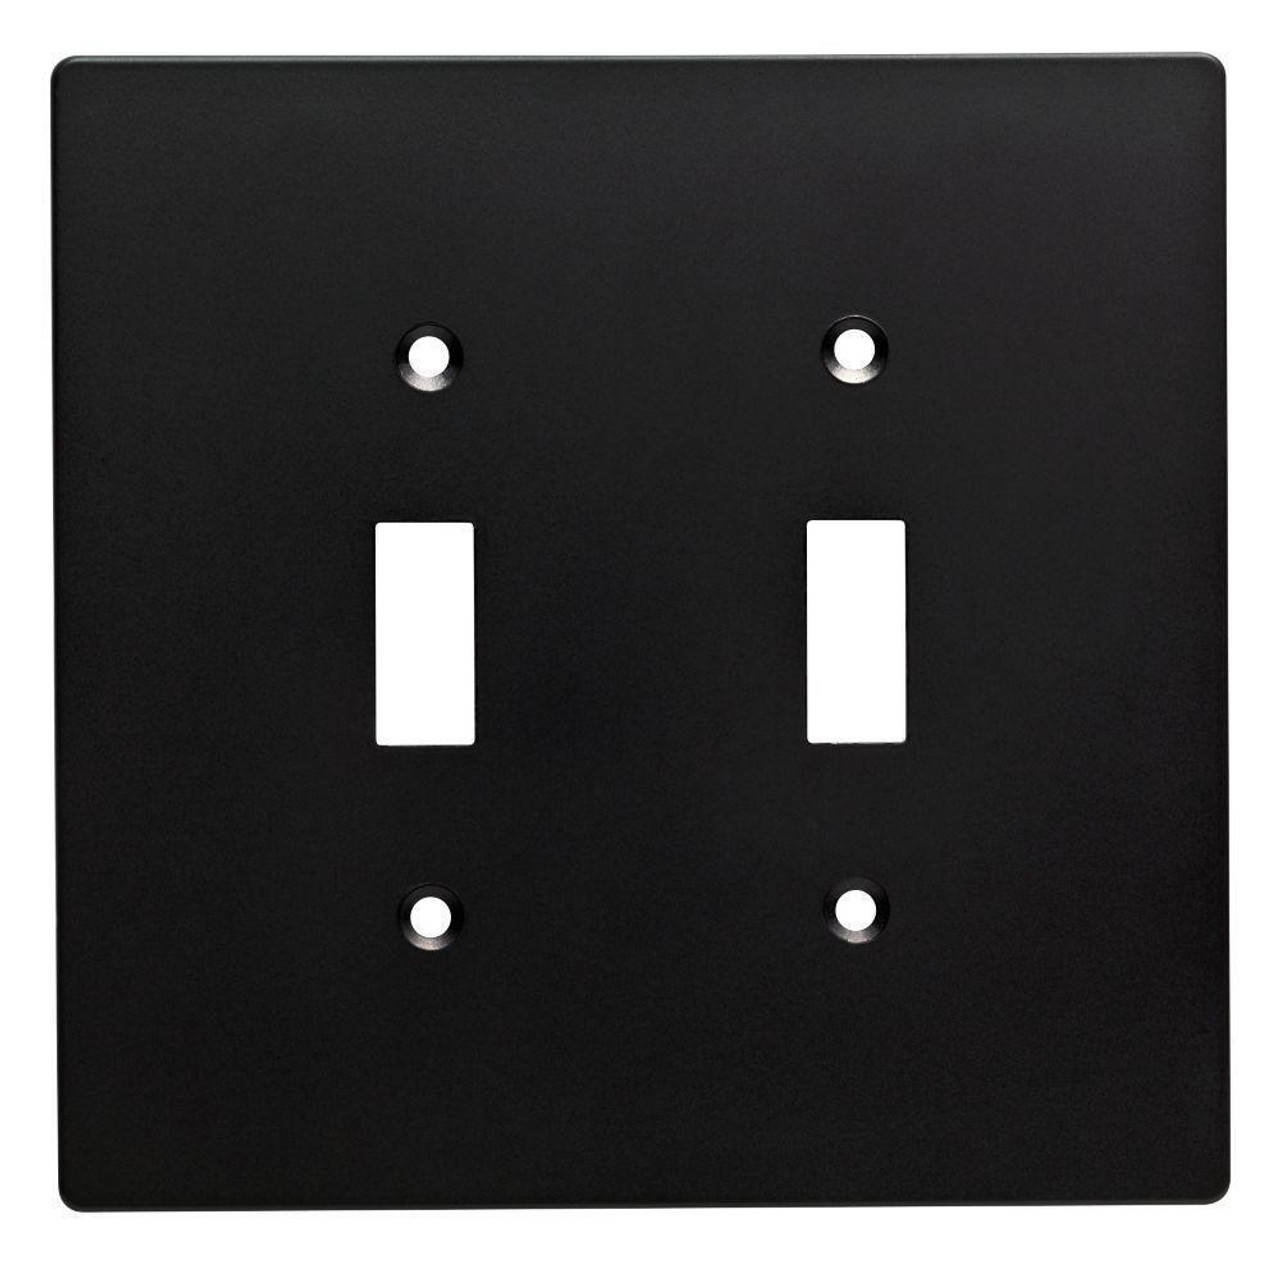 W32734-FB Subway Tile Double Switch Cover Plate